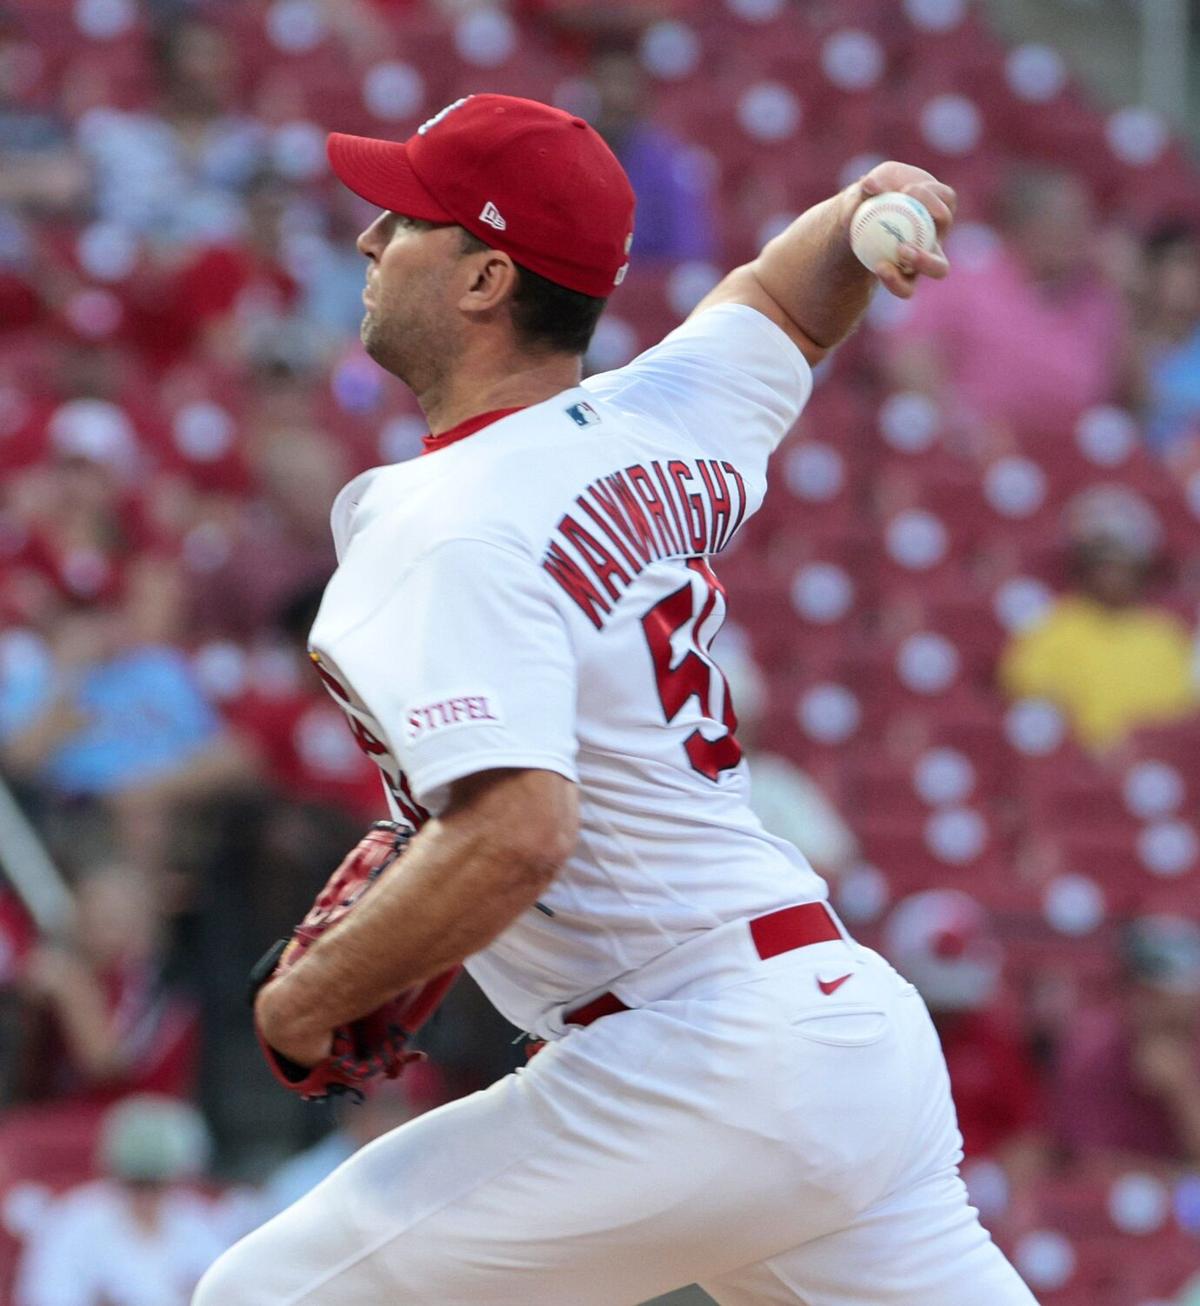 Kim in command: Cardinals lefty throws six scoreless, combines